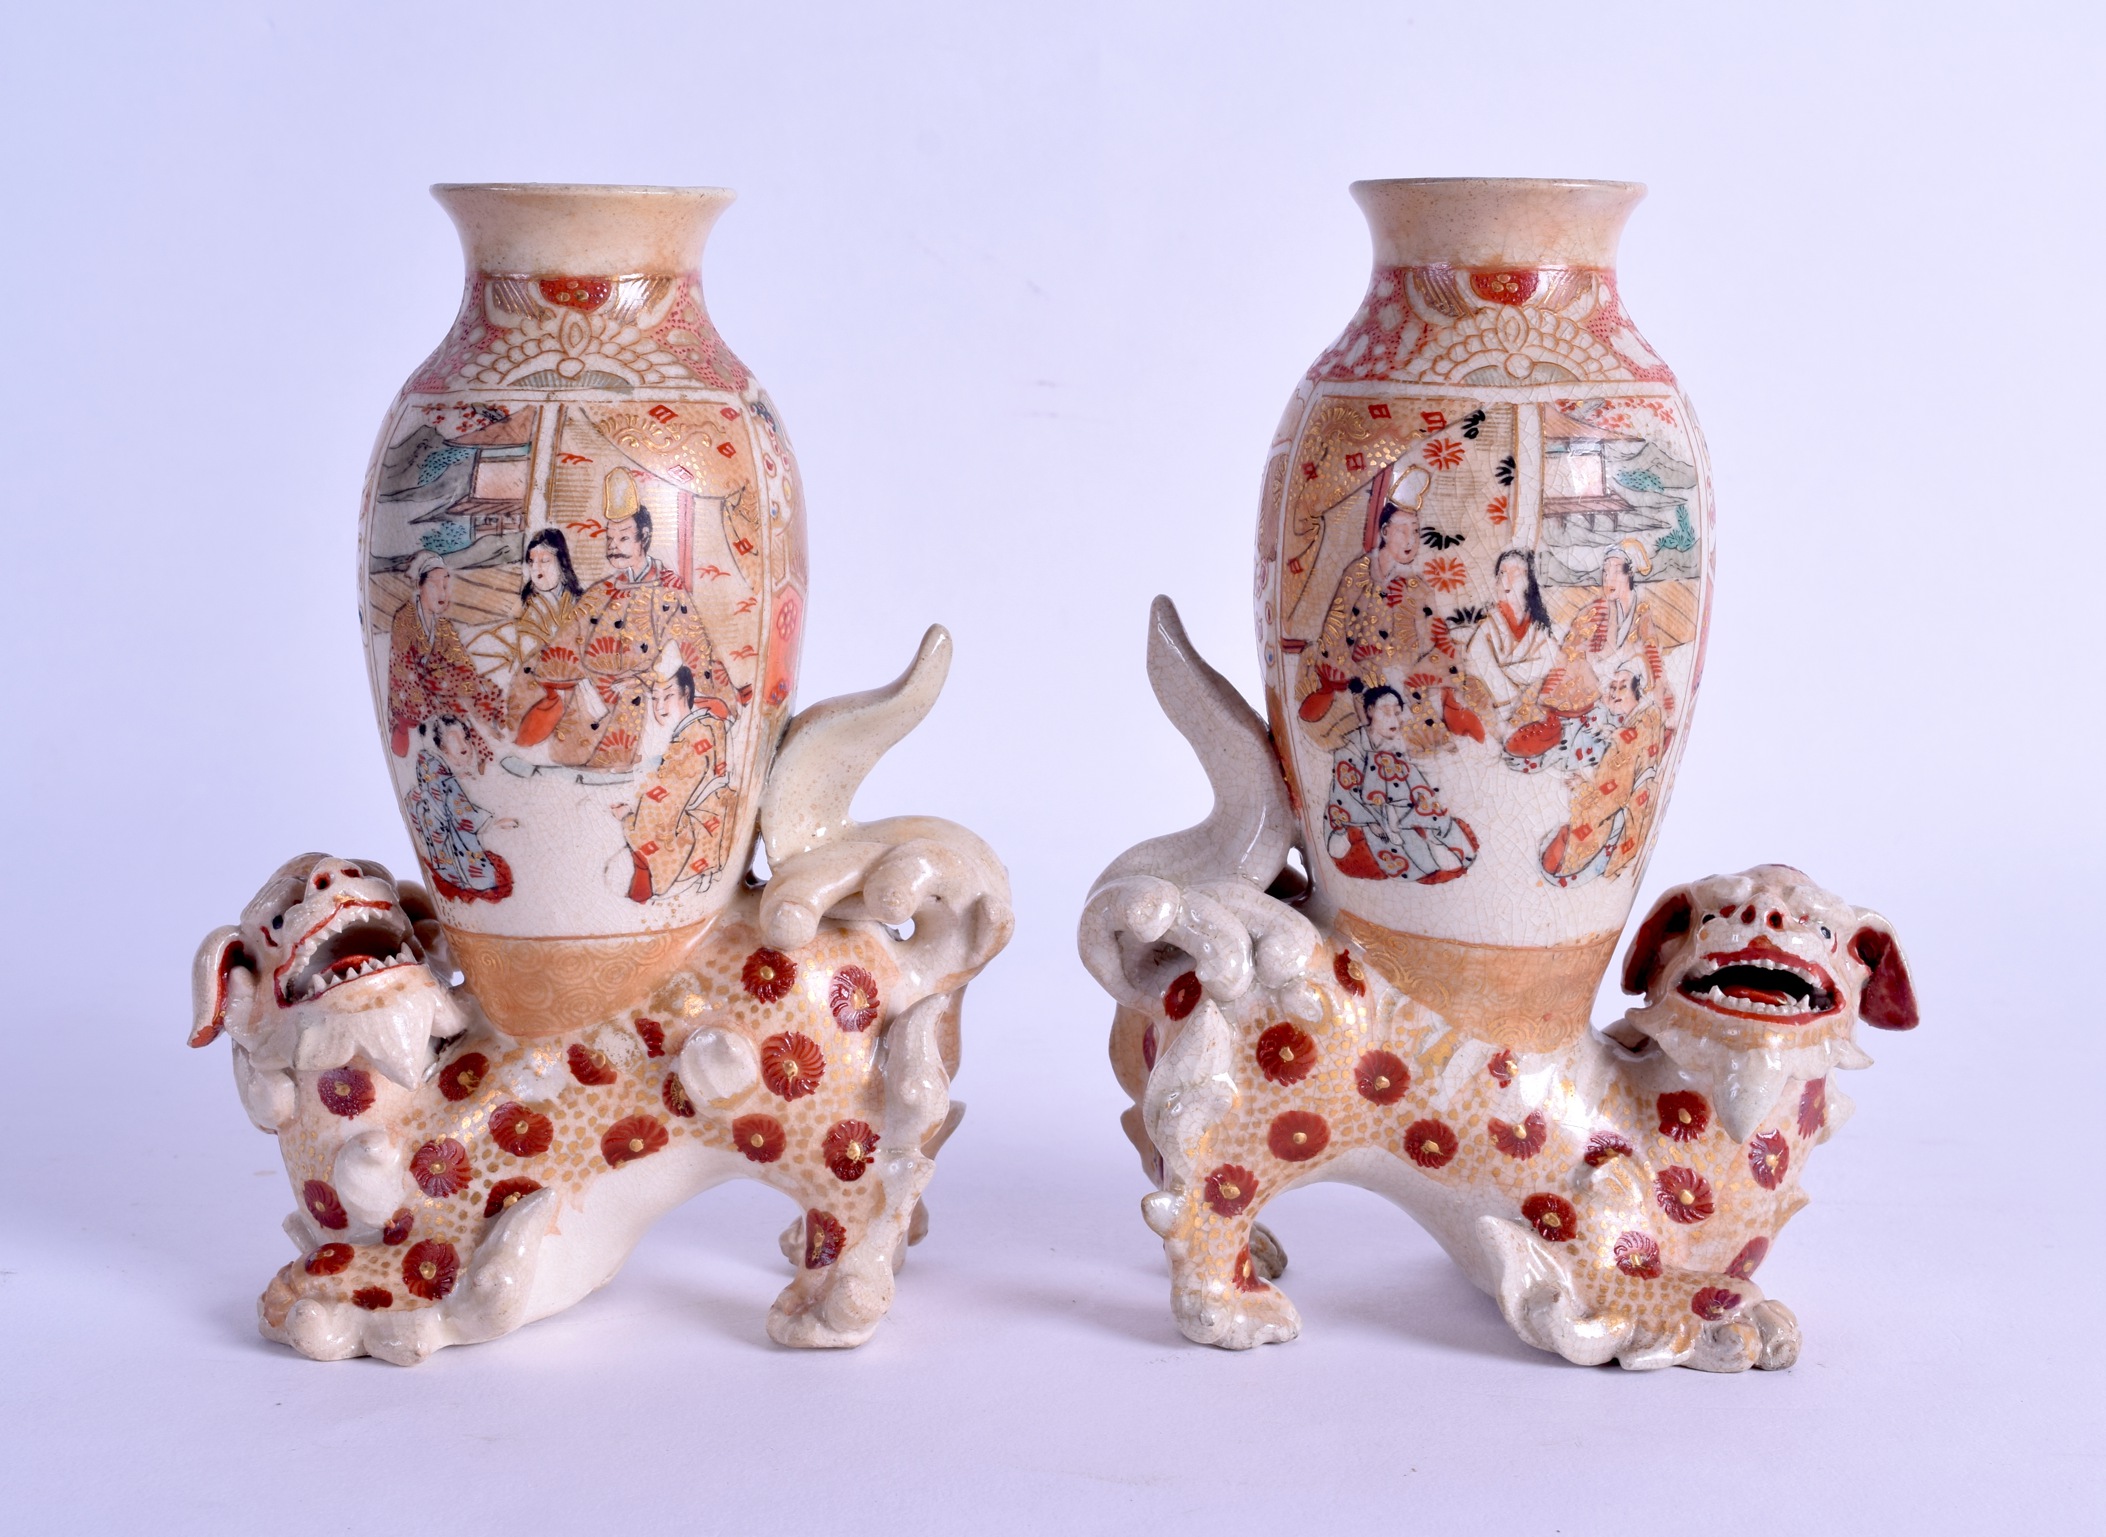 AN UNUSUAL PAIR OF LATE 19TH CENTURY JAPANESE MEIJI PERIOD SATSUMSA VASES modelled as buddhistic